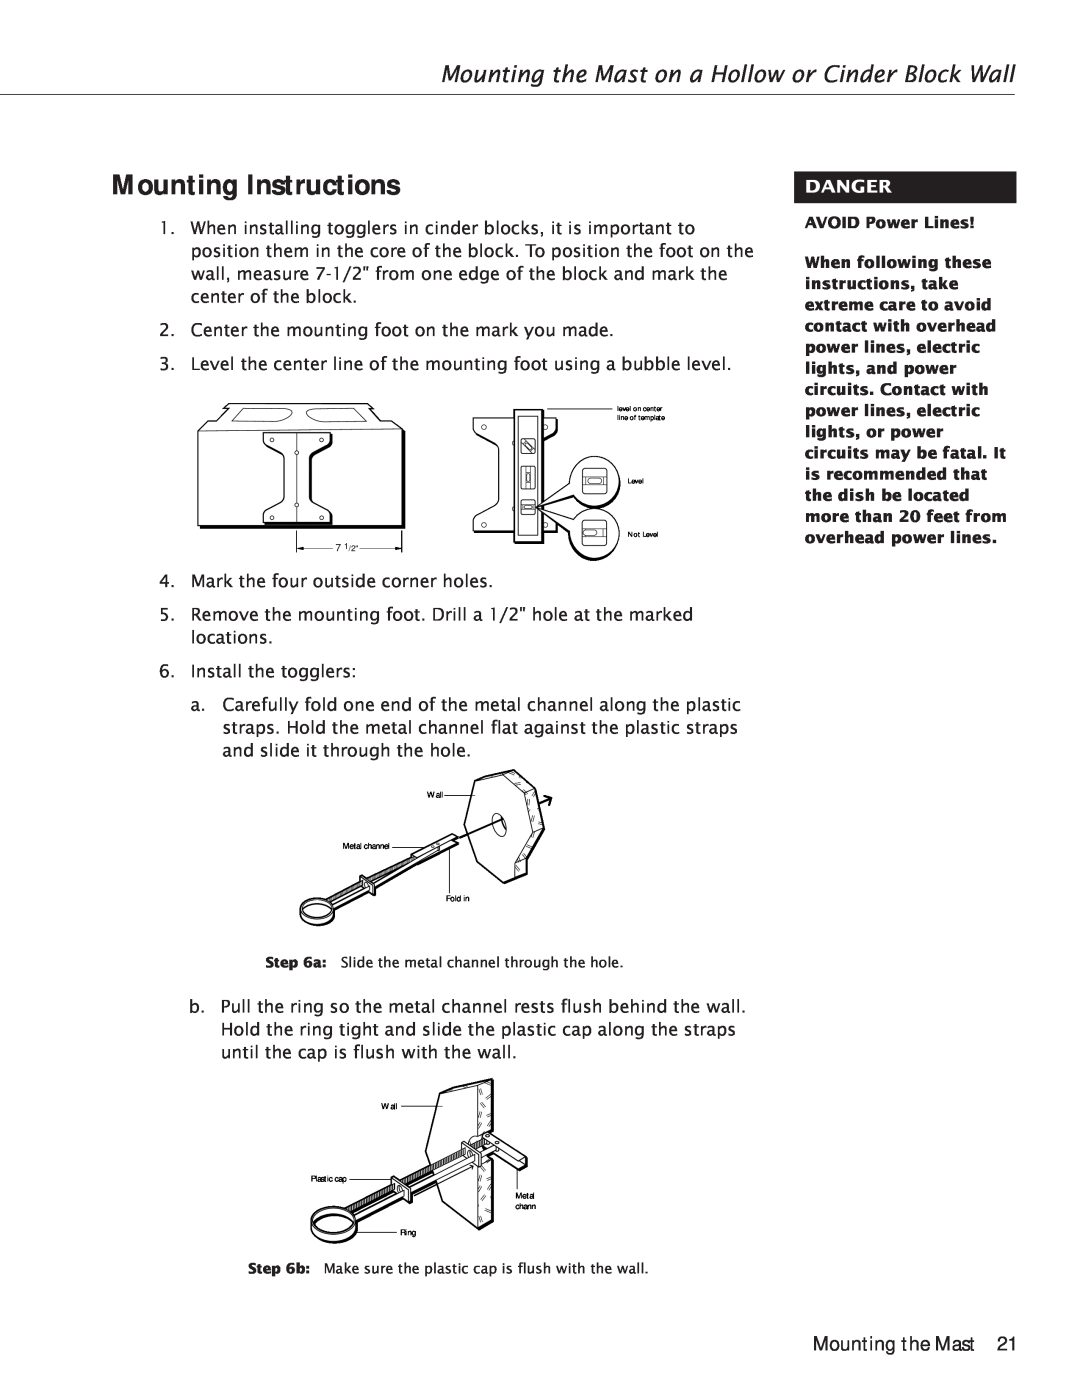 RCA Satellite TV Antenna manual Mounting the Mast on a Hollow or Cinder Block Wall, Mounting Instructions, Danger 